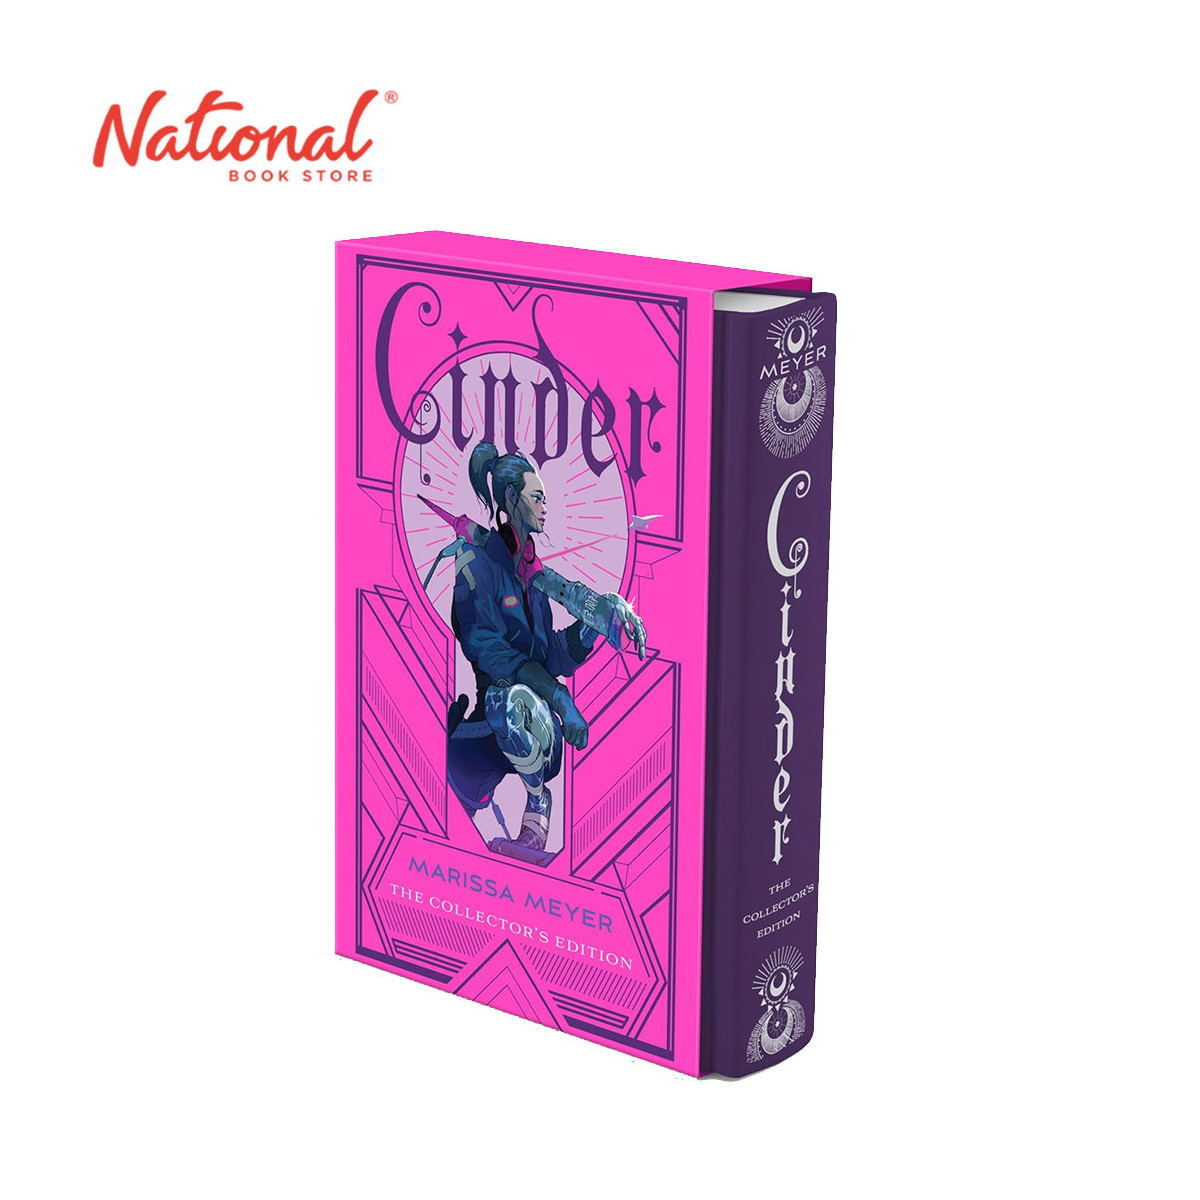 Cinder Collector's Edition by Marissa Meyer - Hardcover - Teens Fiction